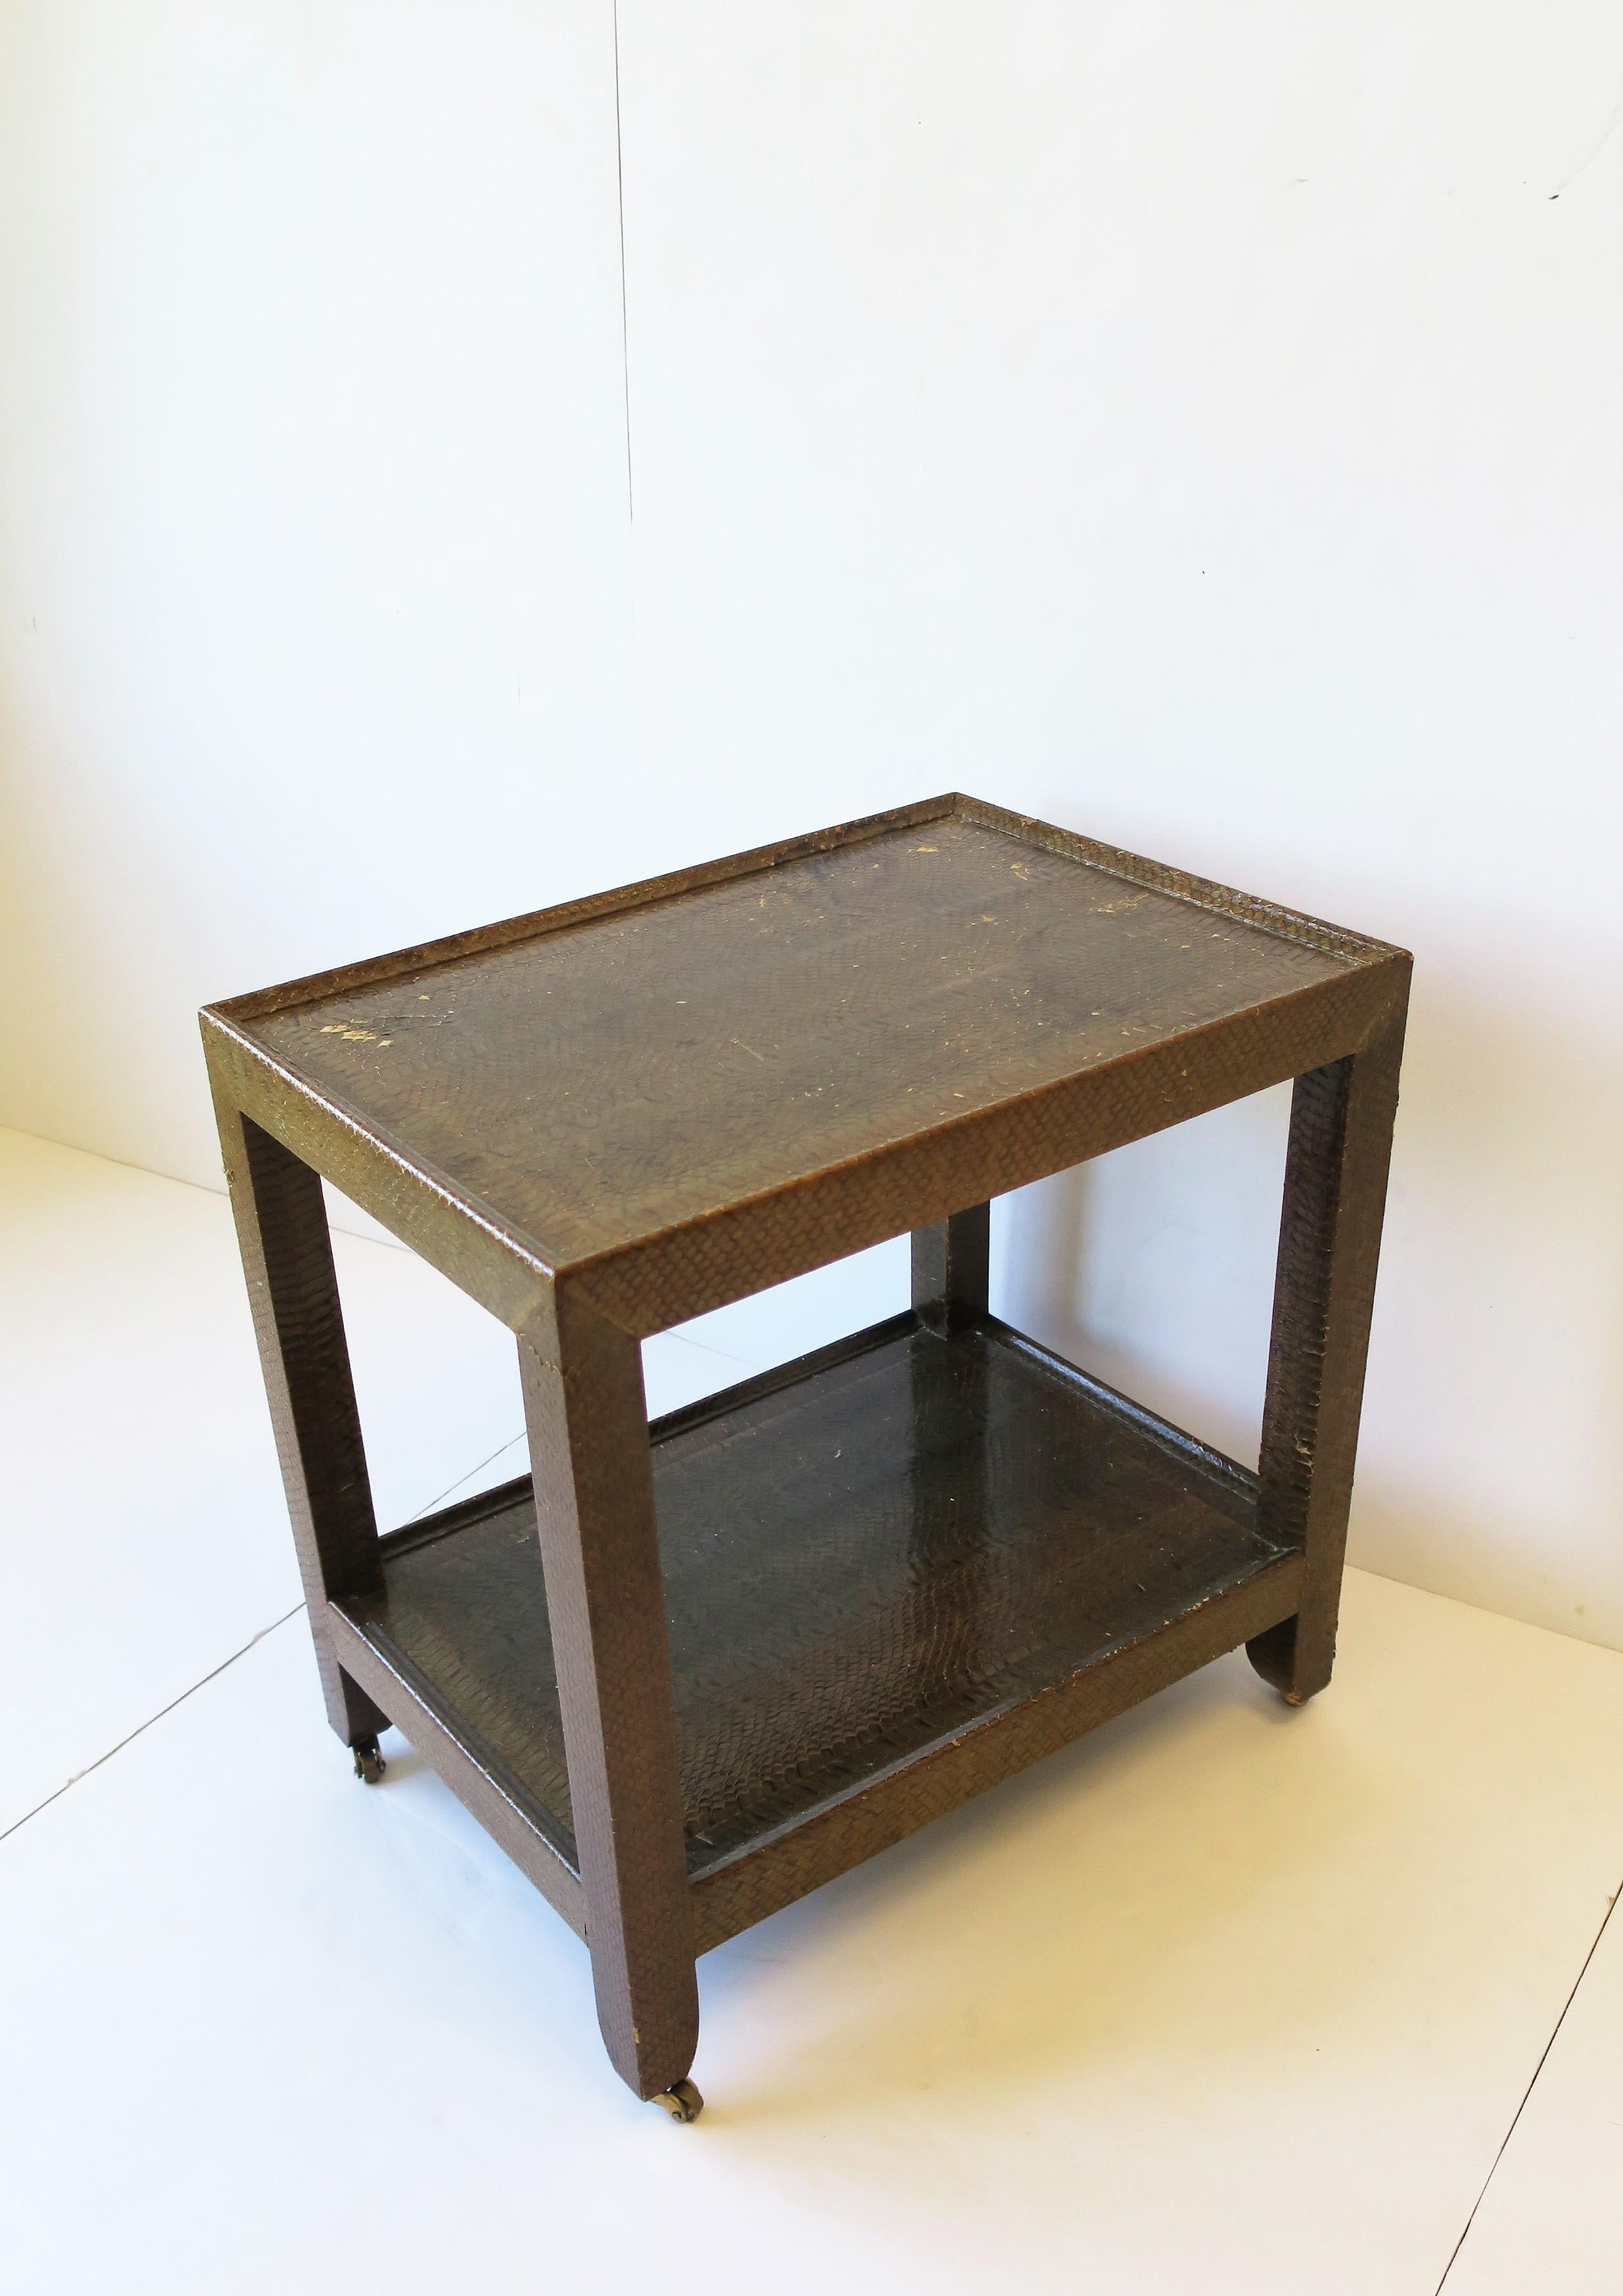 A beautiful Postmodern 'telephone' side or end table by designer Karl Springer, 1990. Table is covered in a beautiful authentic snakeskin in a medium brown and supported by small brass caster wheels. Piece is two tiers with lower shelf area for